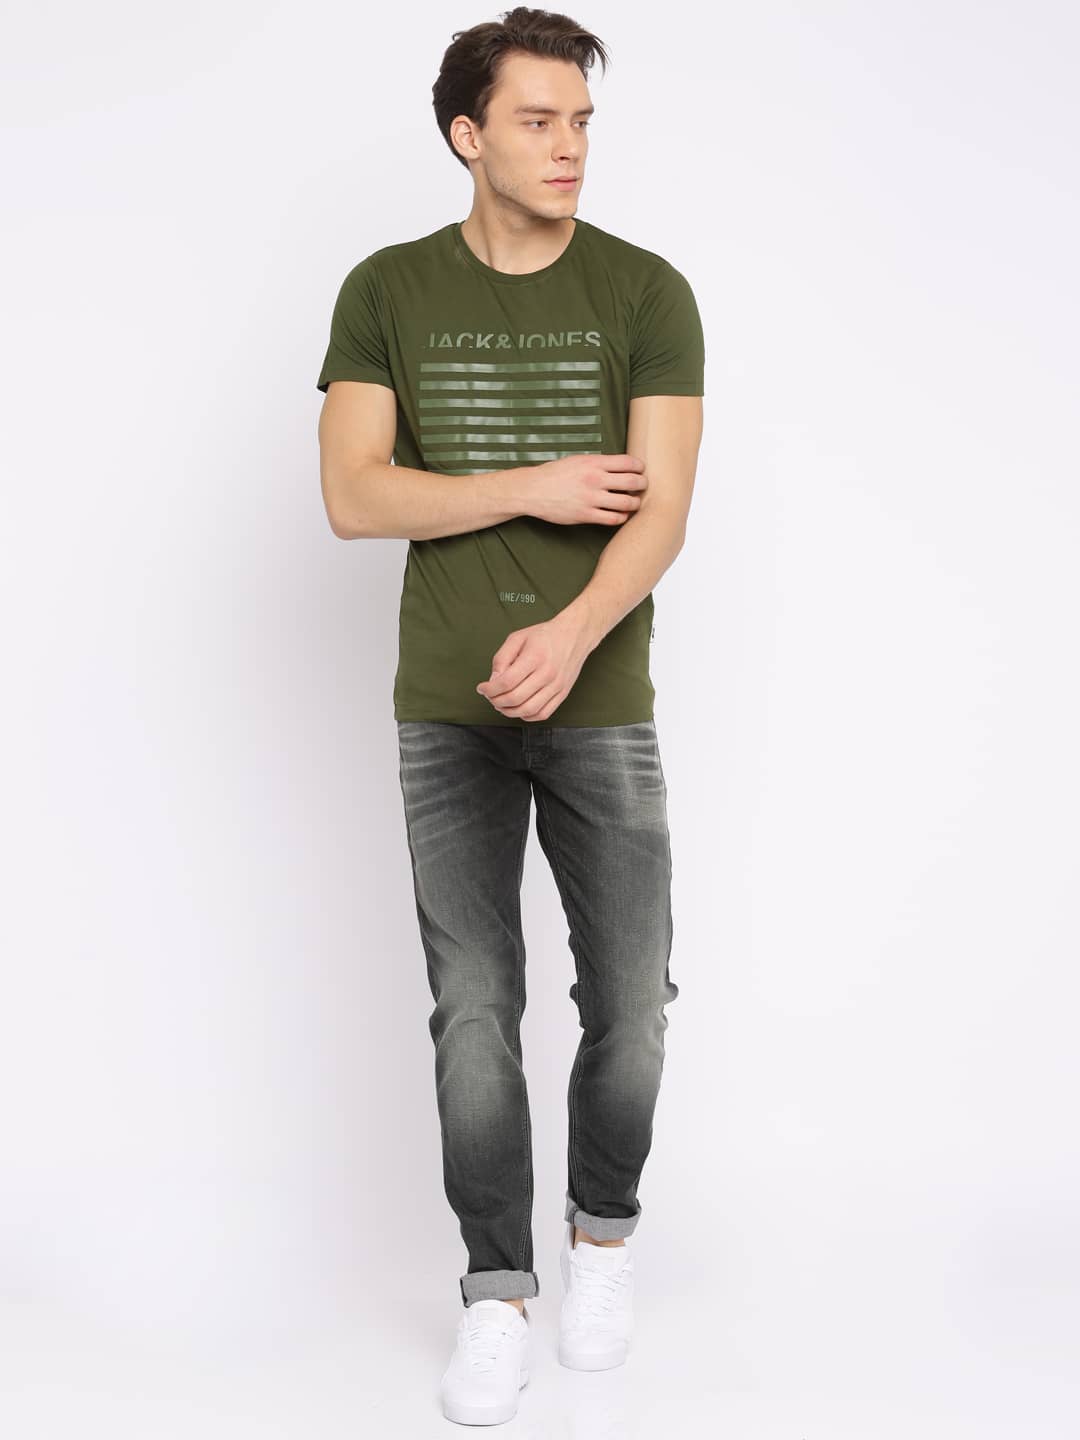 guy wearing Relaxed jeans